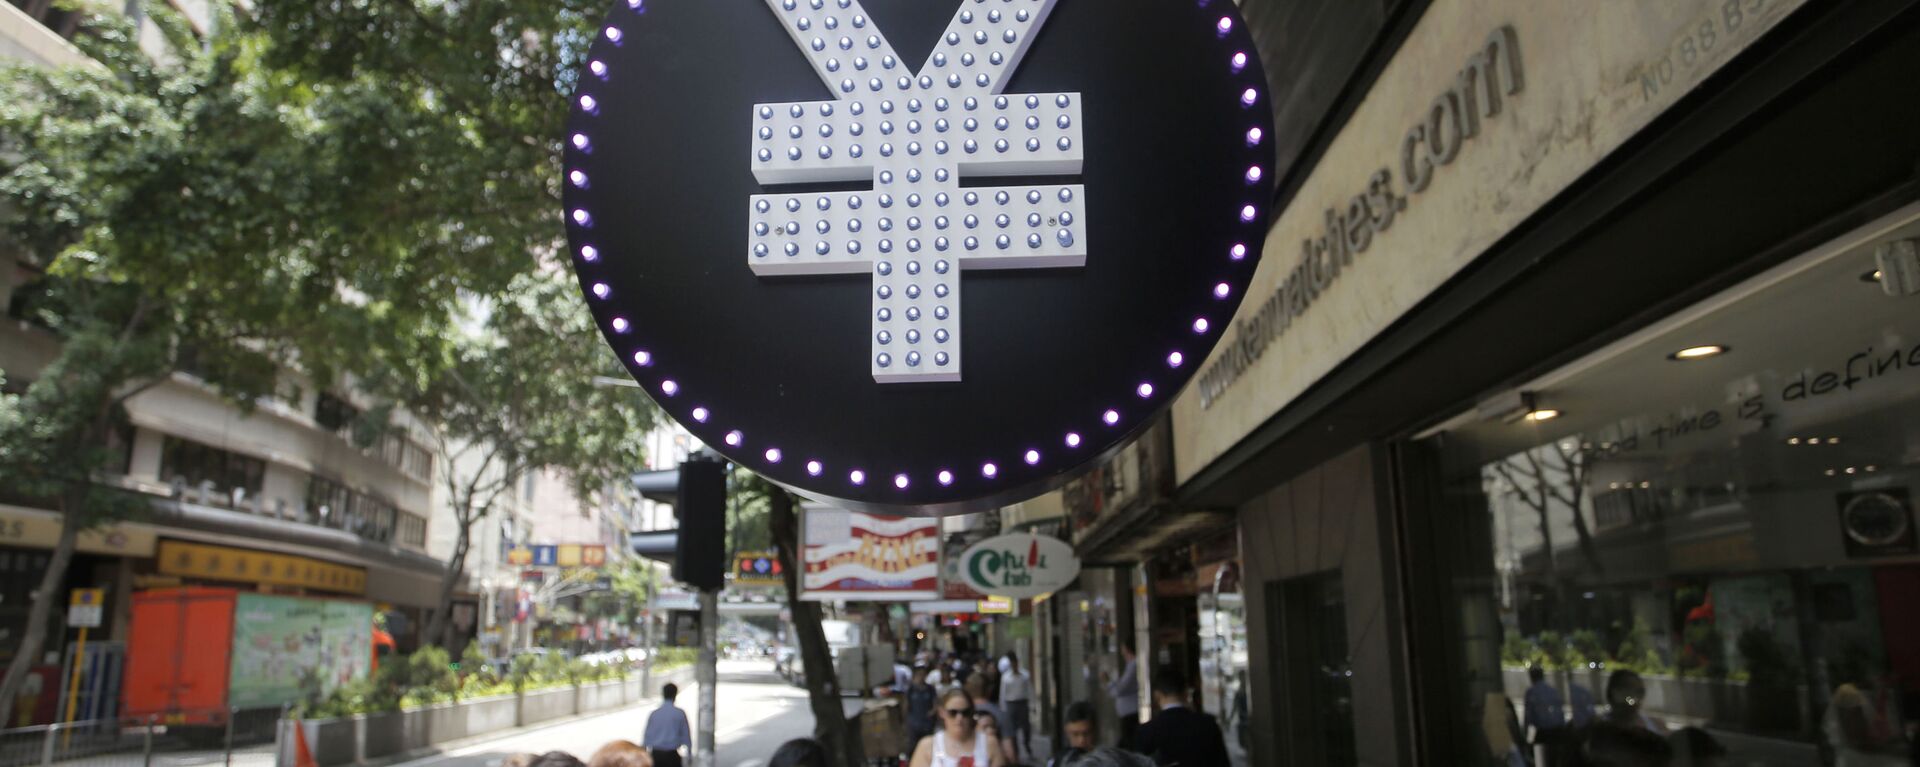 A Chinese yuan sign is seen at a currency exchange shop in Hong Kong, Tuesday, Aug. 11, 2015. China devalued its tightly controlled currency Tuesday following a slump in trade, allowing the yuan's biggest one-day decline in a decade. (AP Photo/Vincent Yu) - Sputnik International, 1920, 15.03.2022